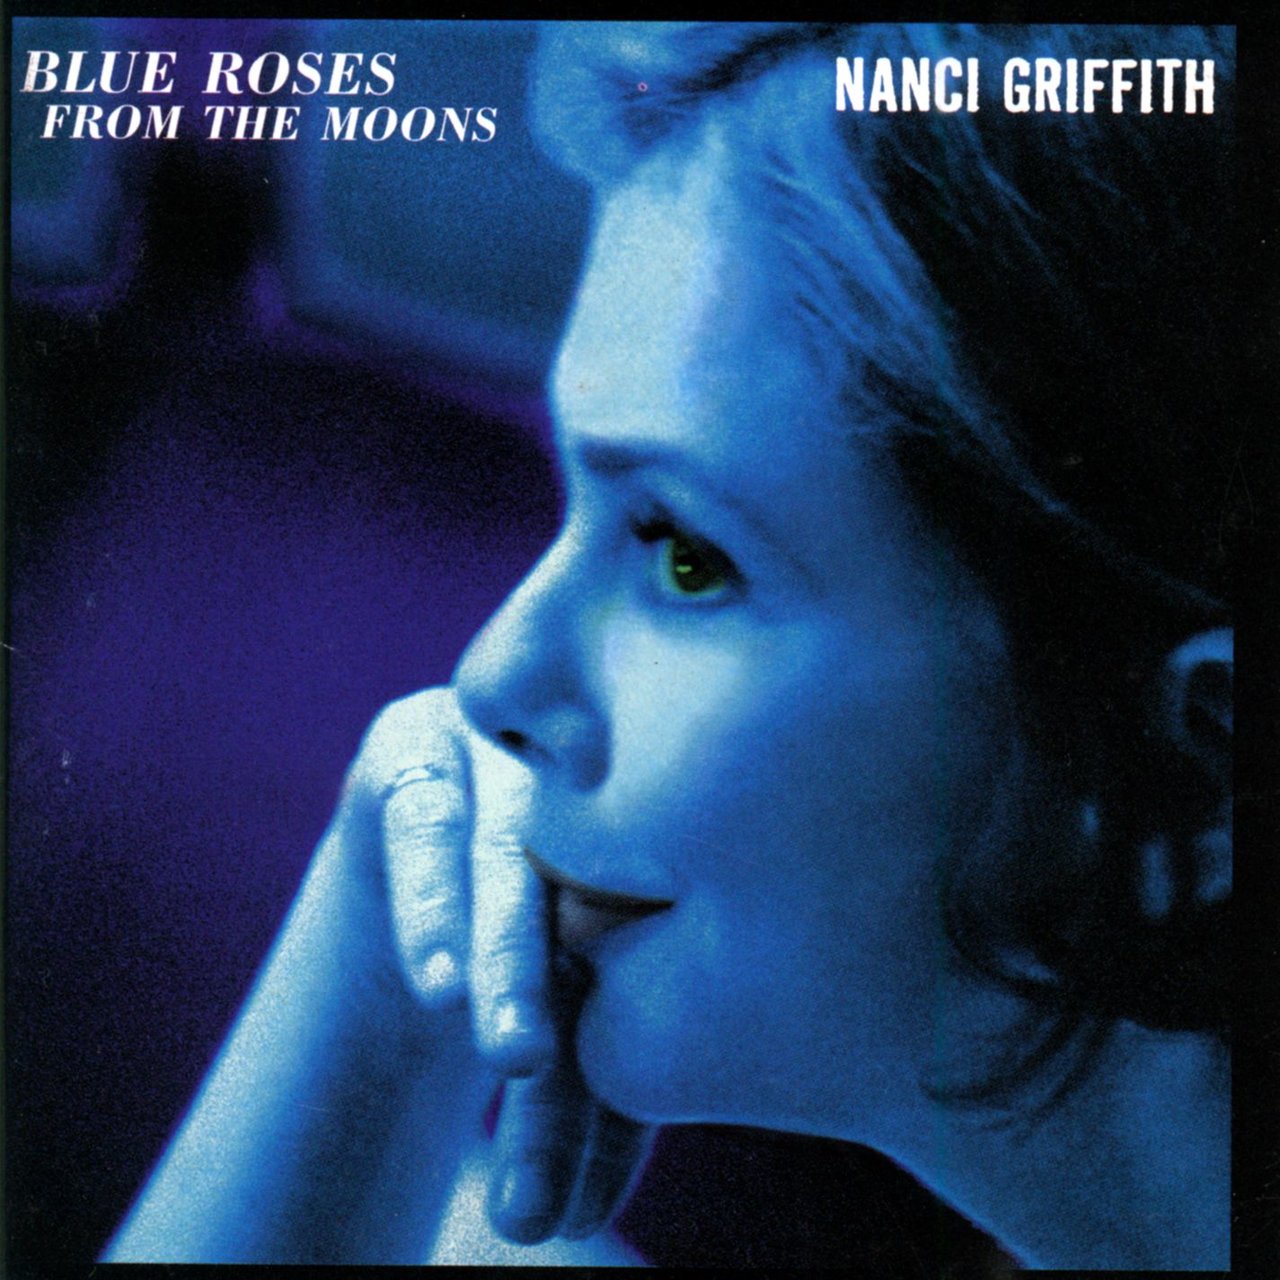 Nanci Griffith - Blue Roses From The Moons [1997]